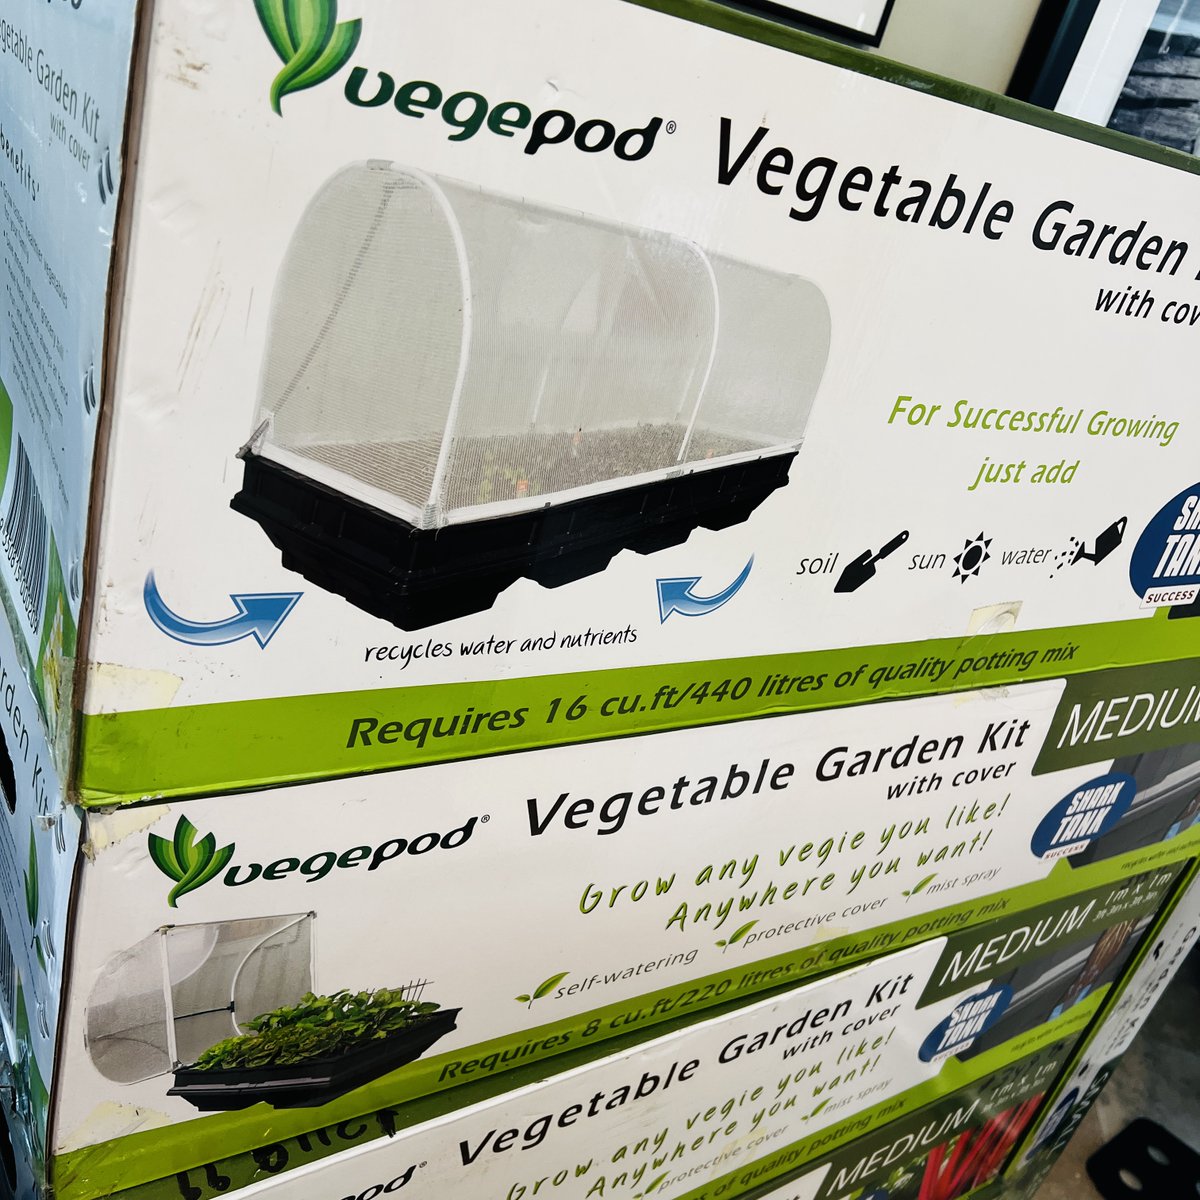 Grow what you want, anywhere you want! Vegepods in a variety of sizes are now on sale at the Garden Center... #elmgrens #elmgrensservices #richmondhill #richmondhillgardencenter #rhgagardencenter #nursery #gardeninginthesouth #hometowngardencenter #vegepod